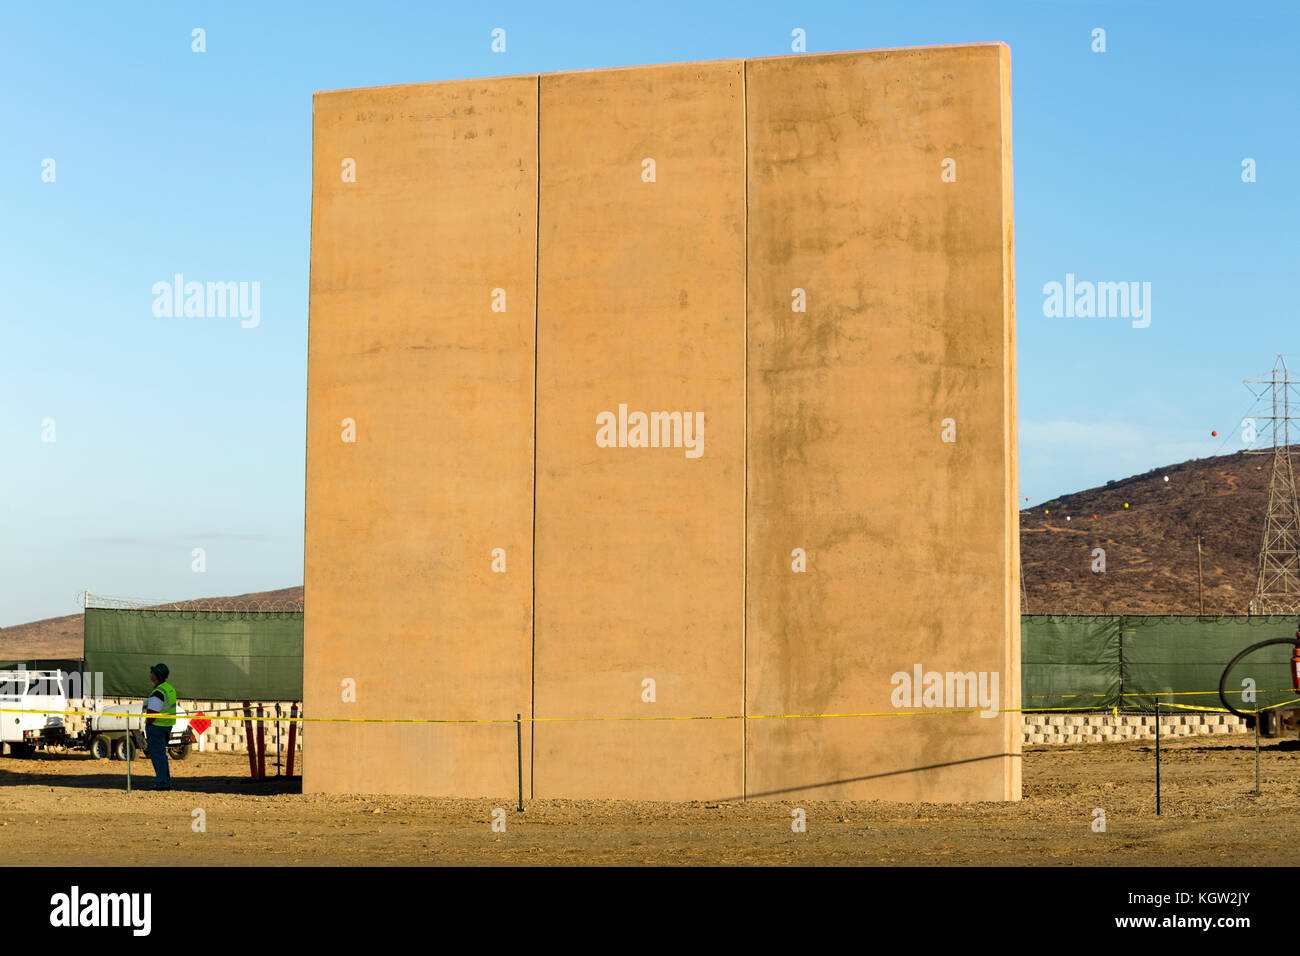 Trump administration new US-Mexico border wall prototypes are unveiled in October 2017. This concrete wall prototype was designed and built by Fisher Sand & Gravel Co., an Arizona-based company and will be subjected to testing to ensure they can withstand attack and attempts to go through, under and over them. See more information below. Stock Photo